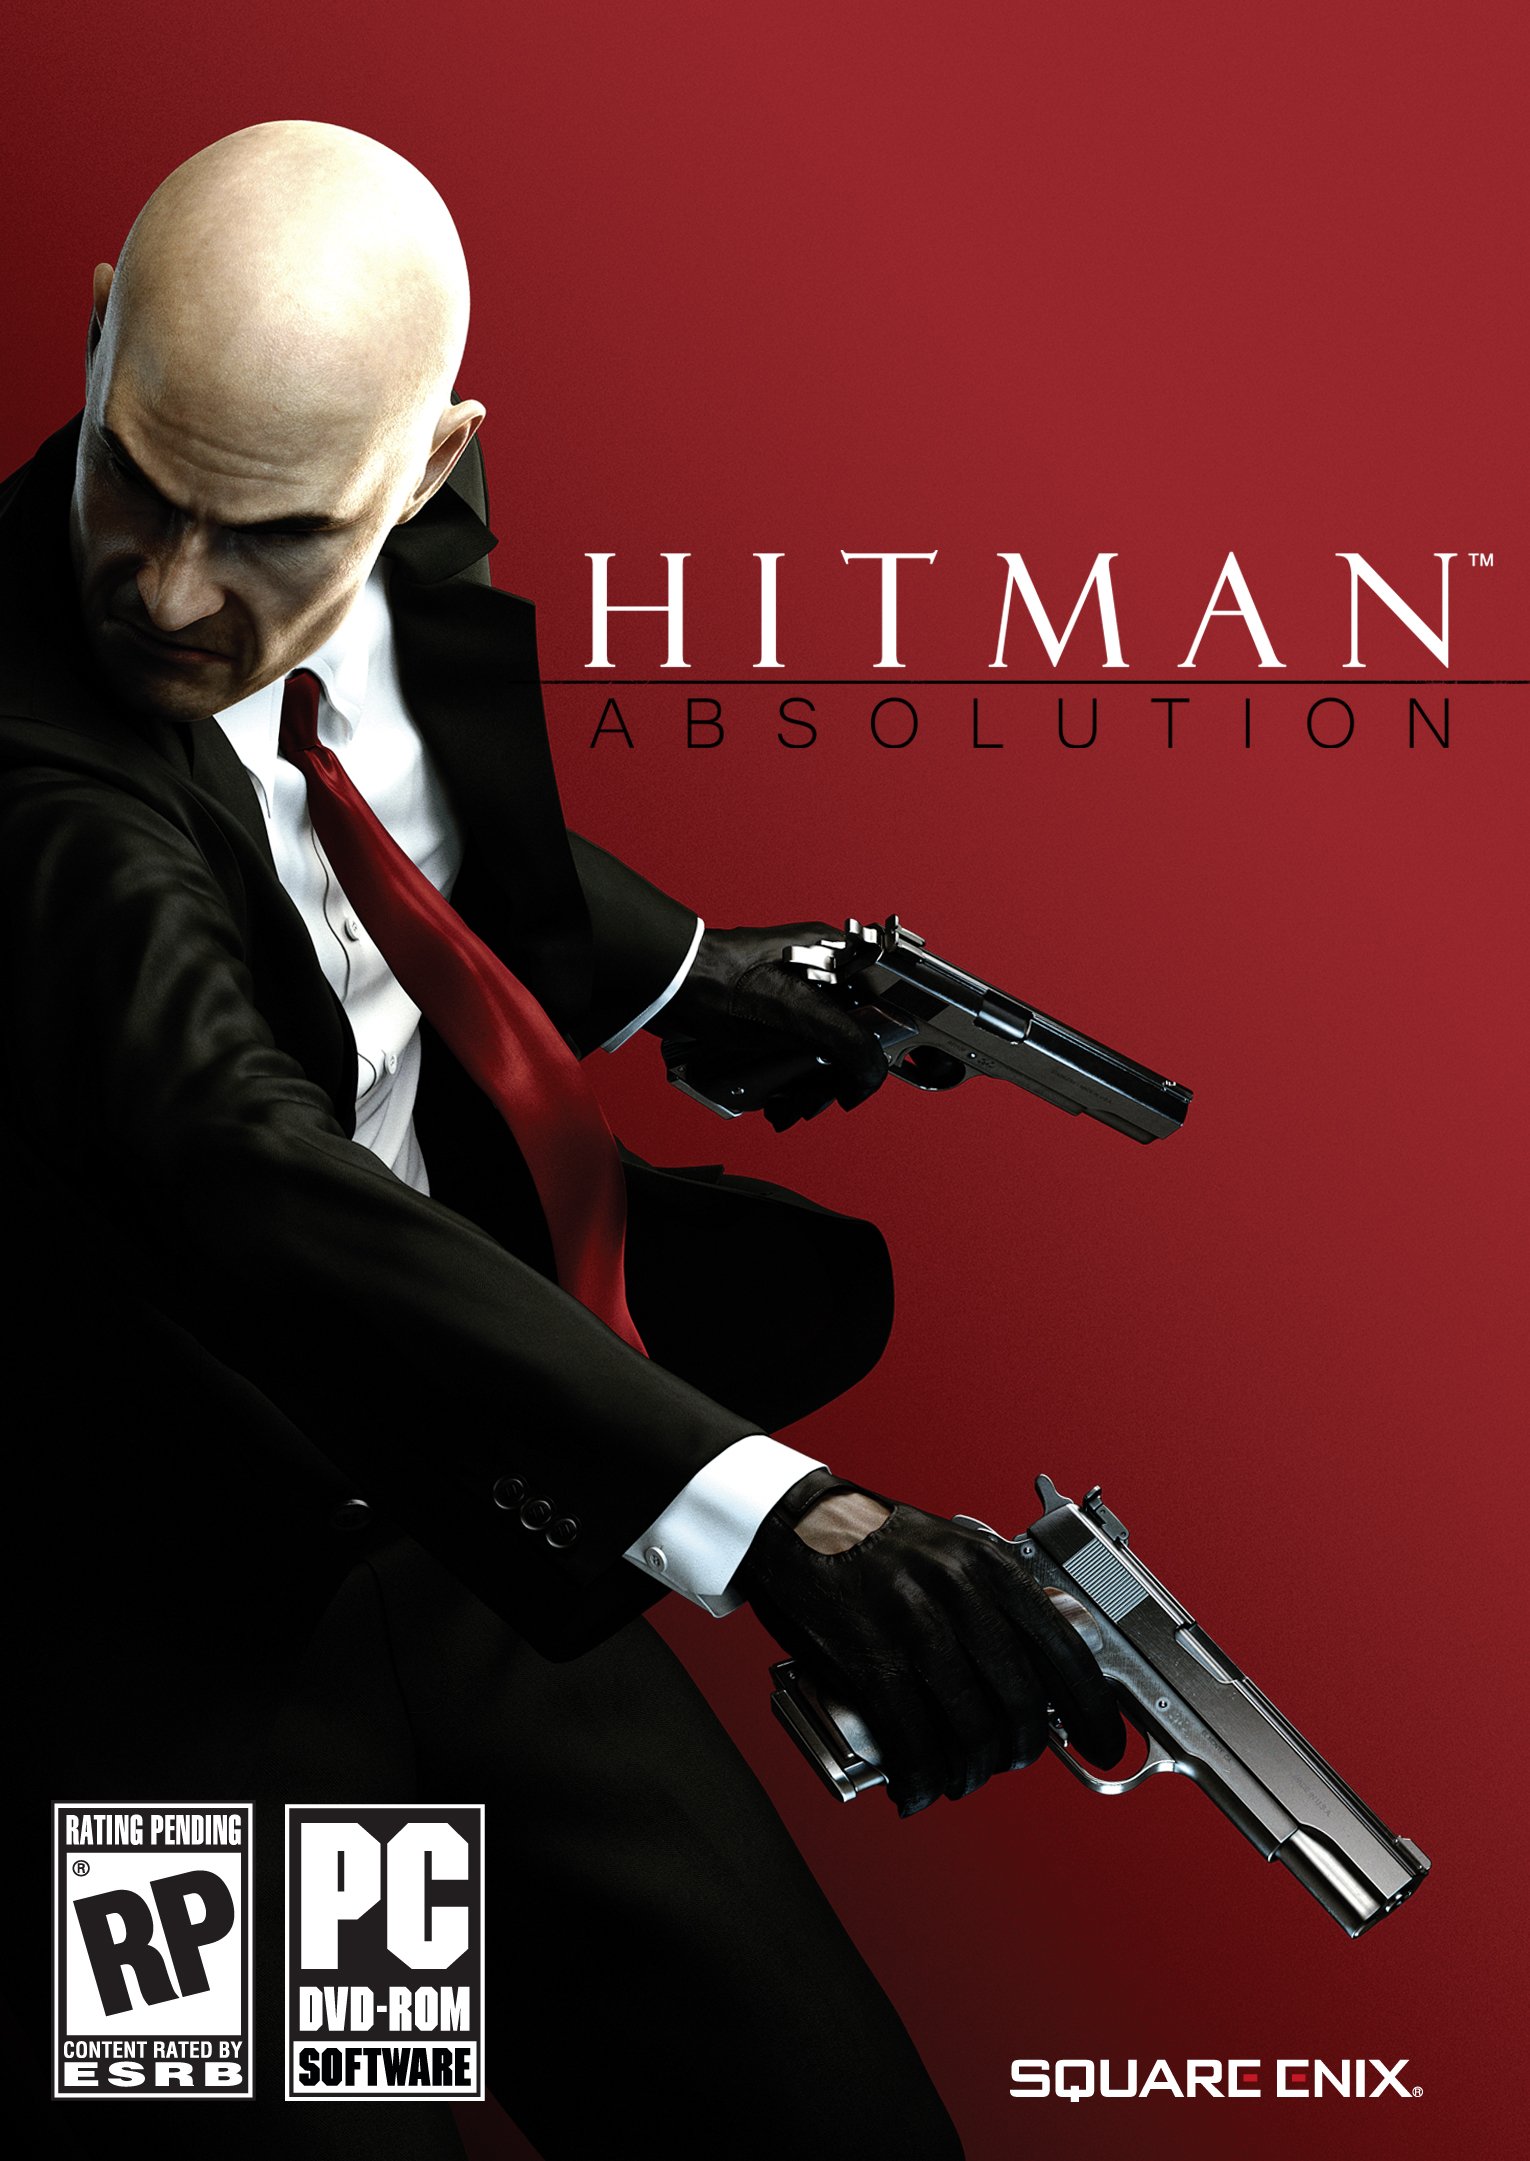 new hitman pc game release date